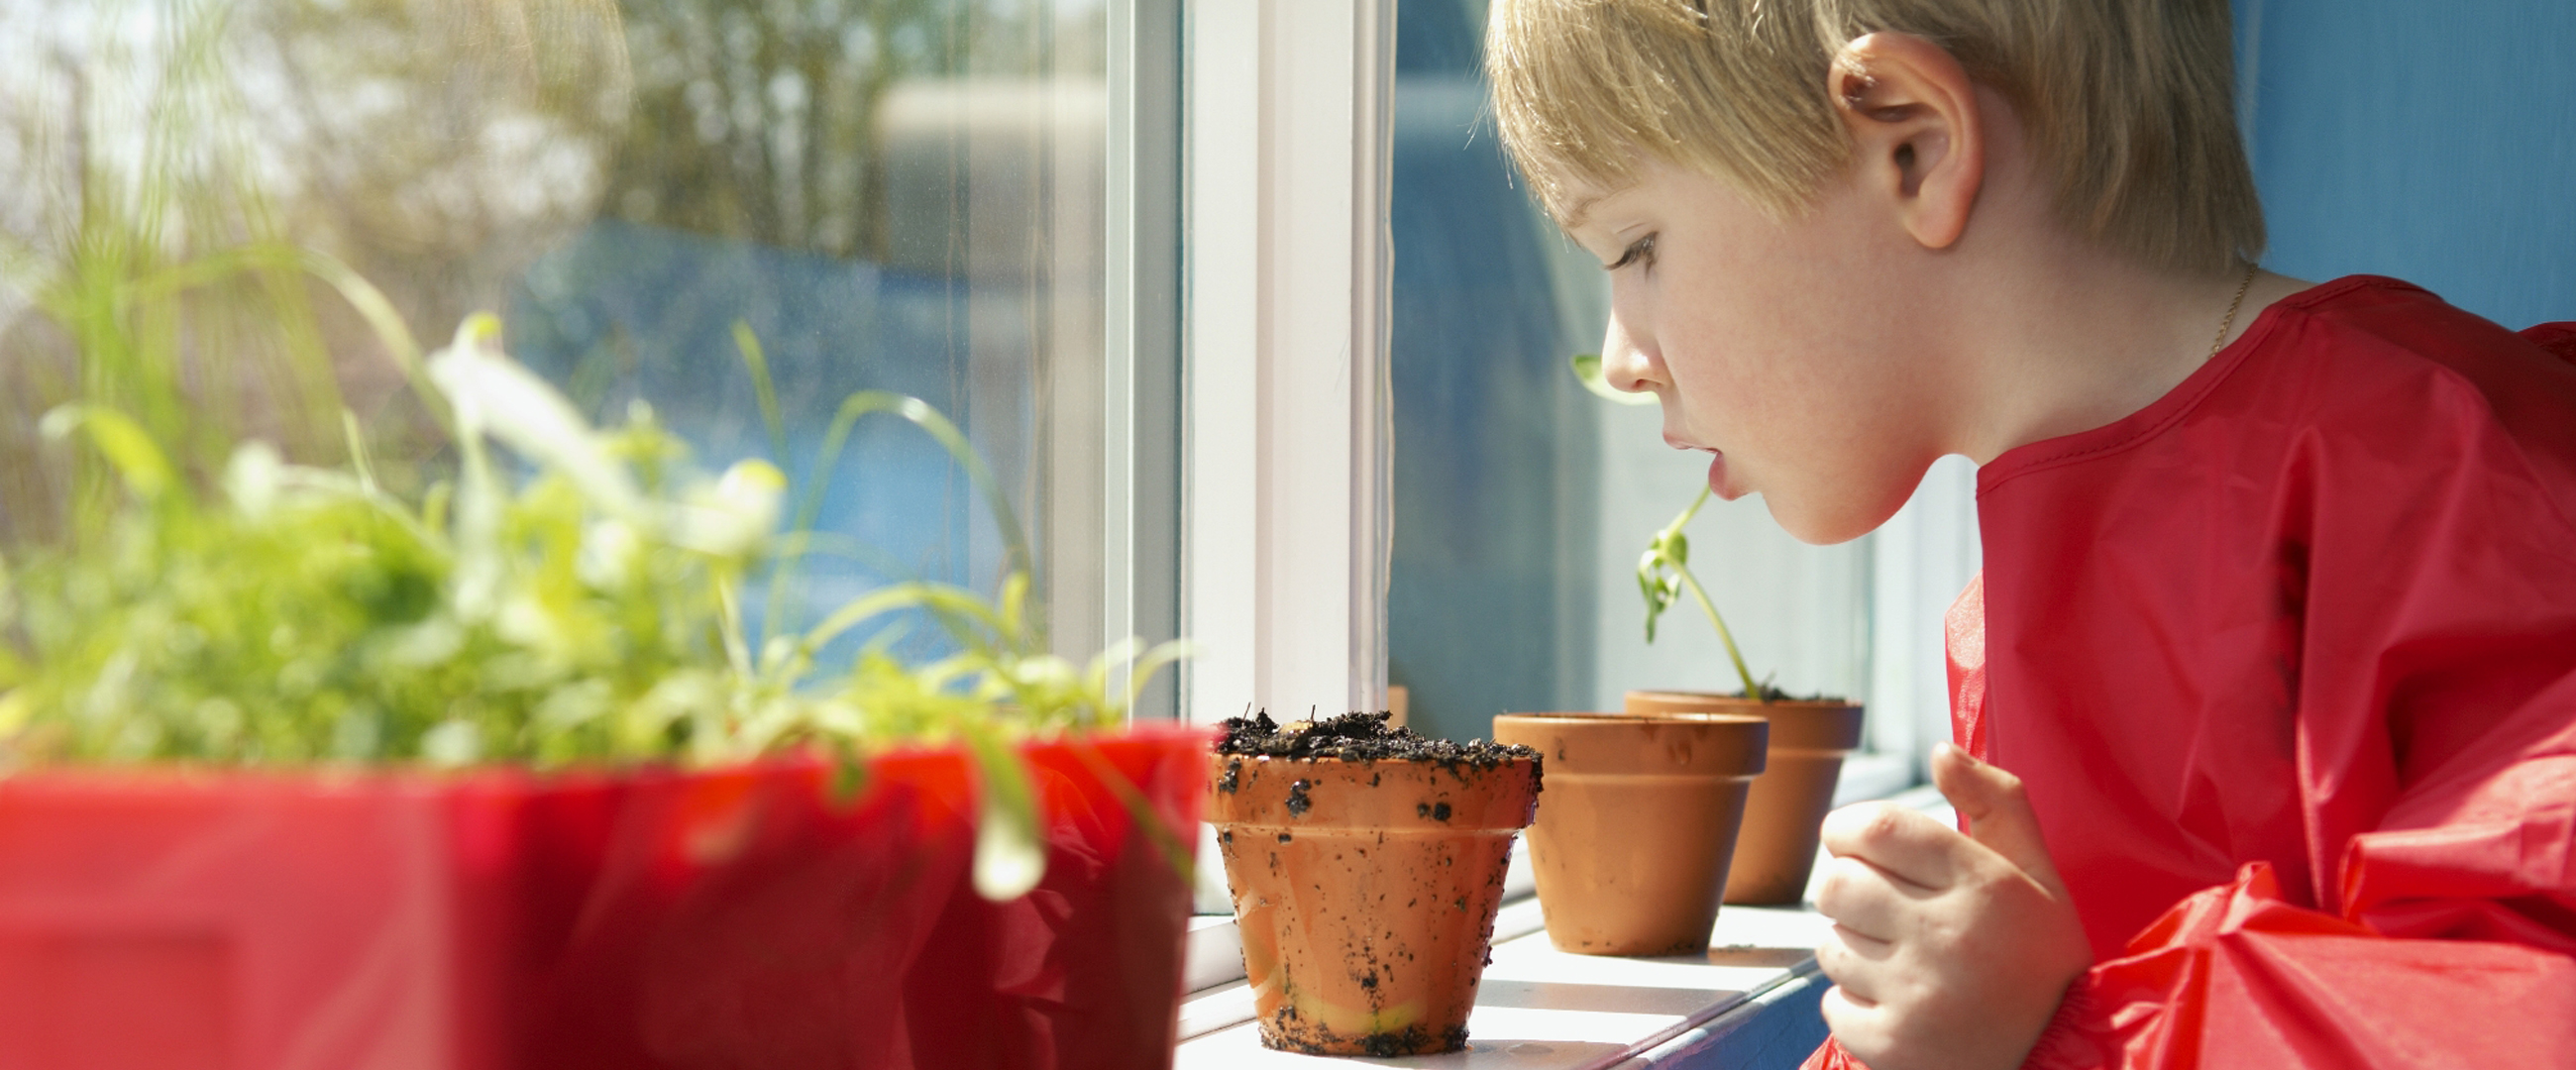 young boy in classroom looking at plants